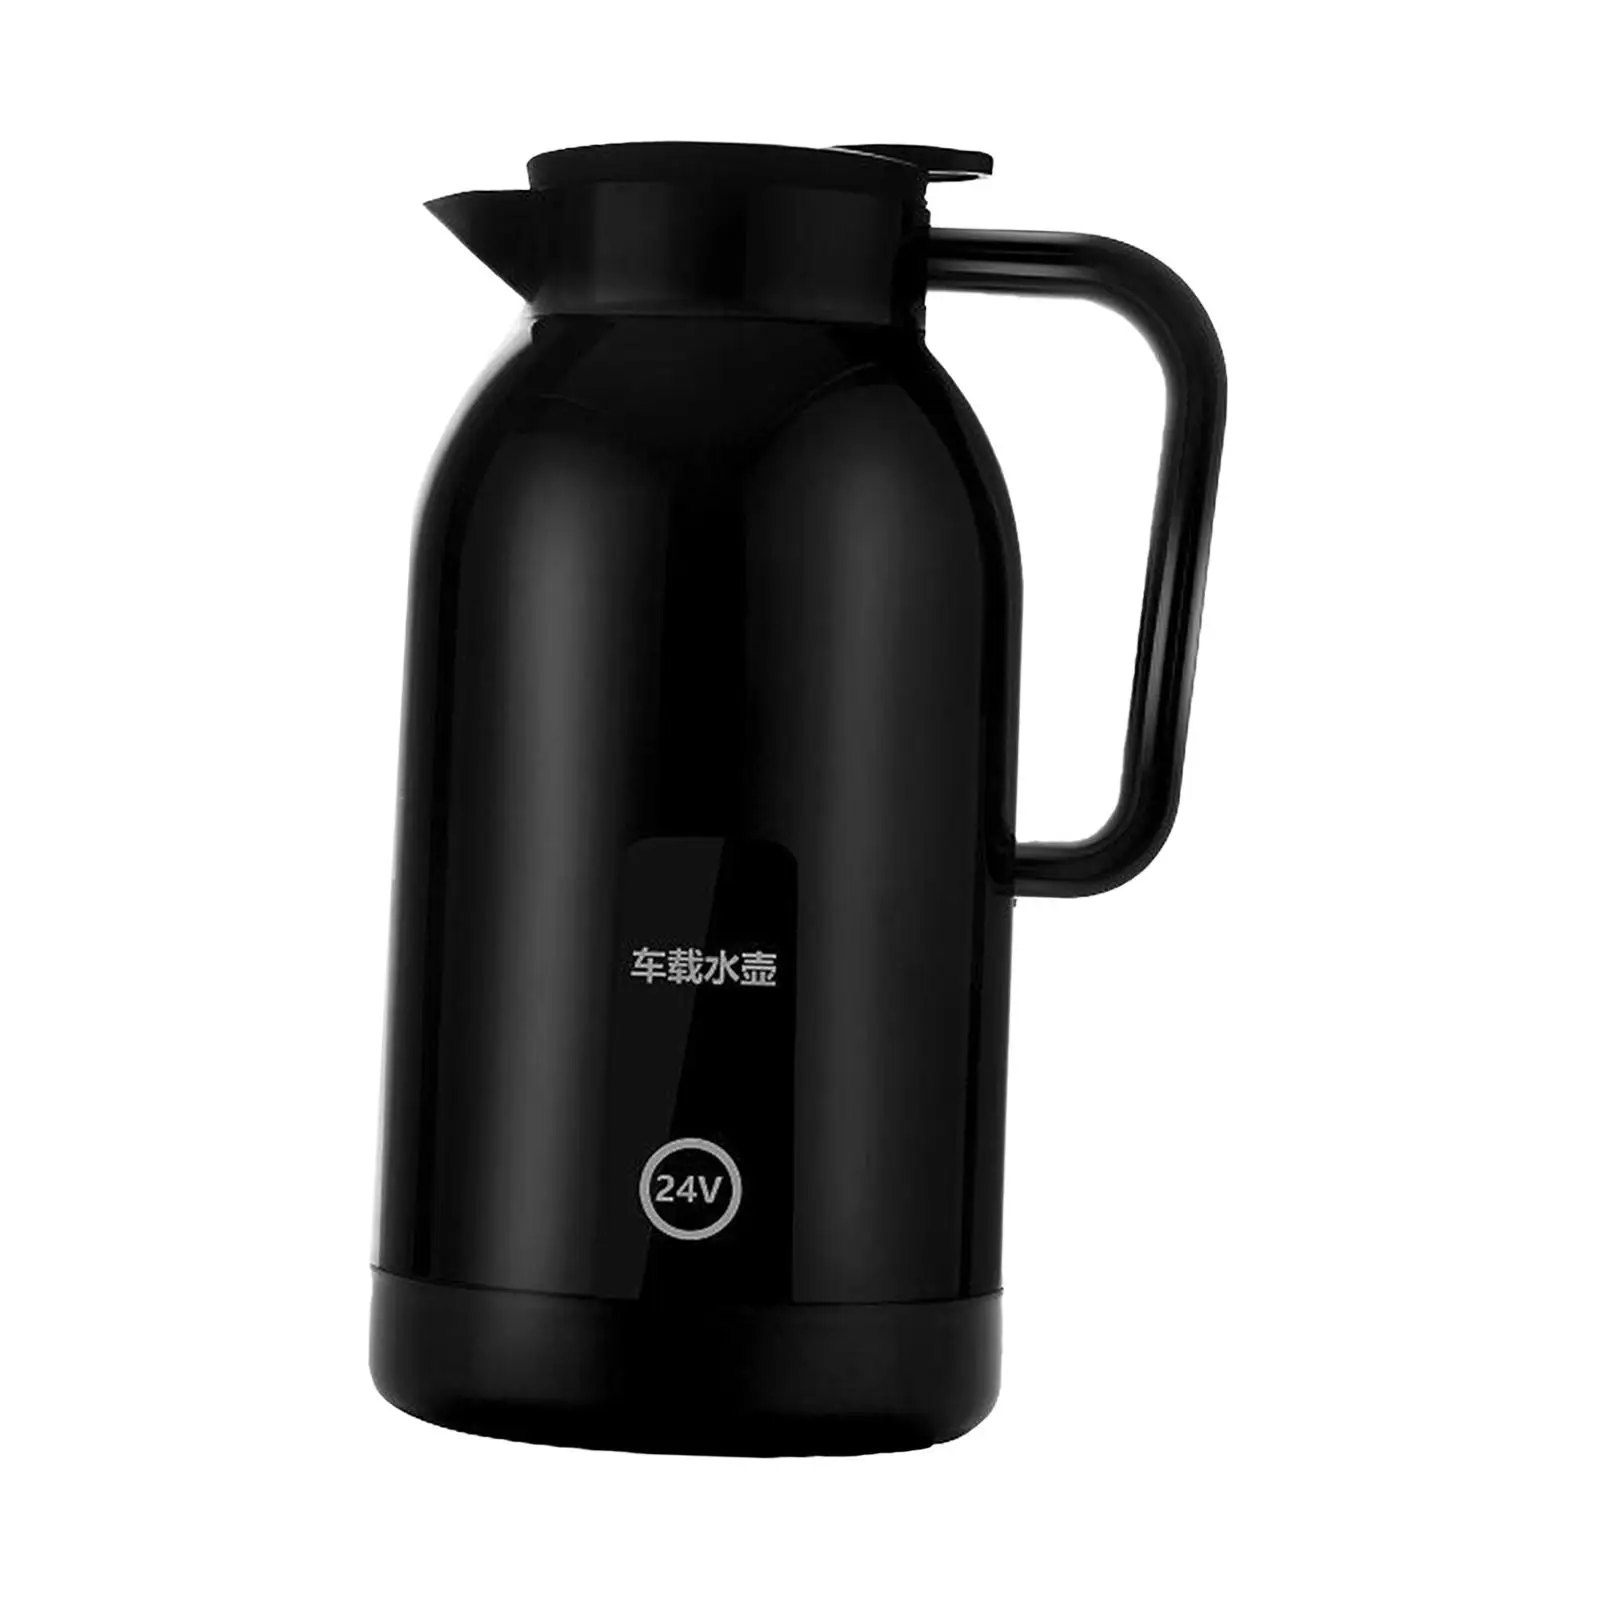 Car Kettle Fast Heating 12Hrs Warmer Portable for Water Tea Coffee Milk Water Heating Bottle for Self Driving Tour Truck Drivers